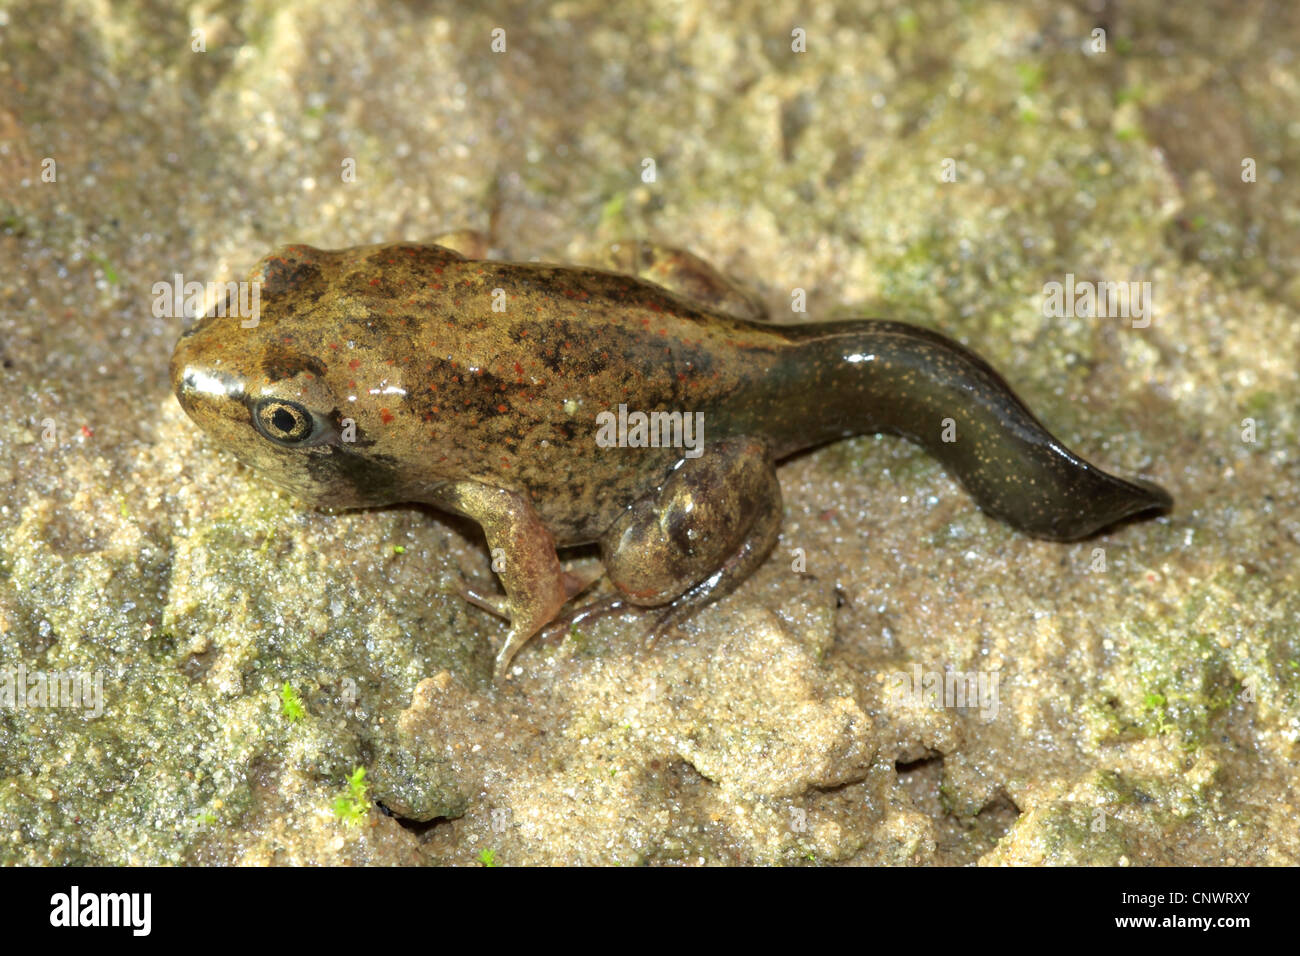 common spadefoot, garlic toad (Pelobates fuscus), juvenile with remains of the tail, Germany Stock Photo